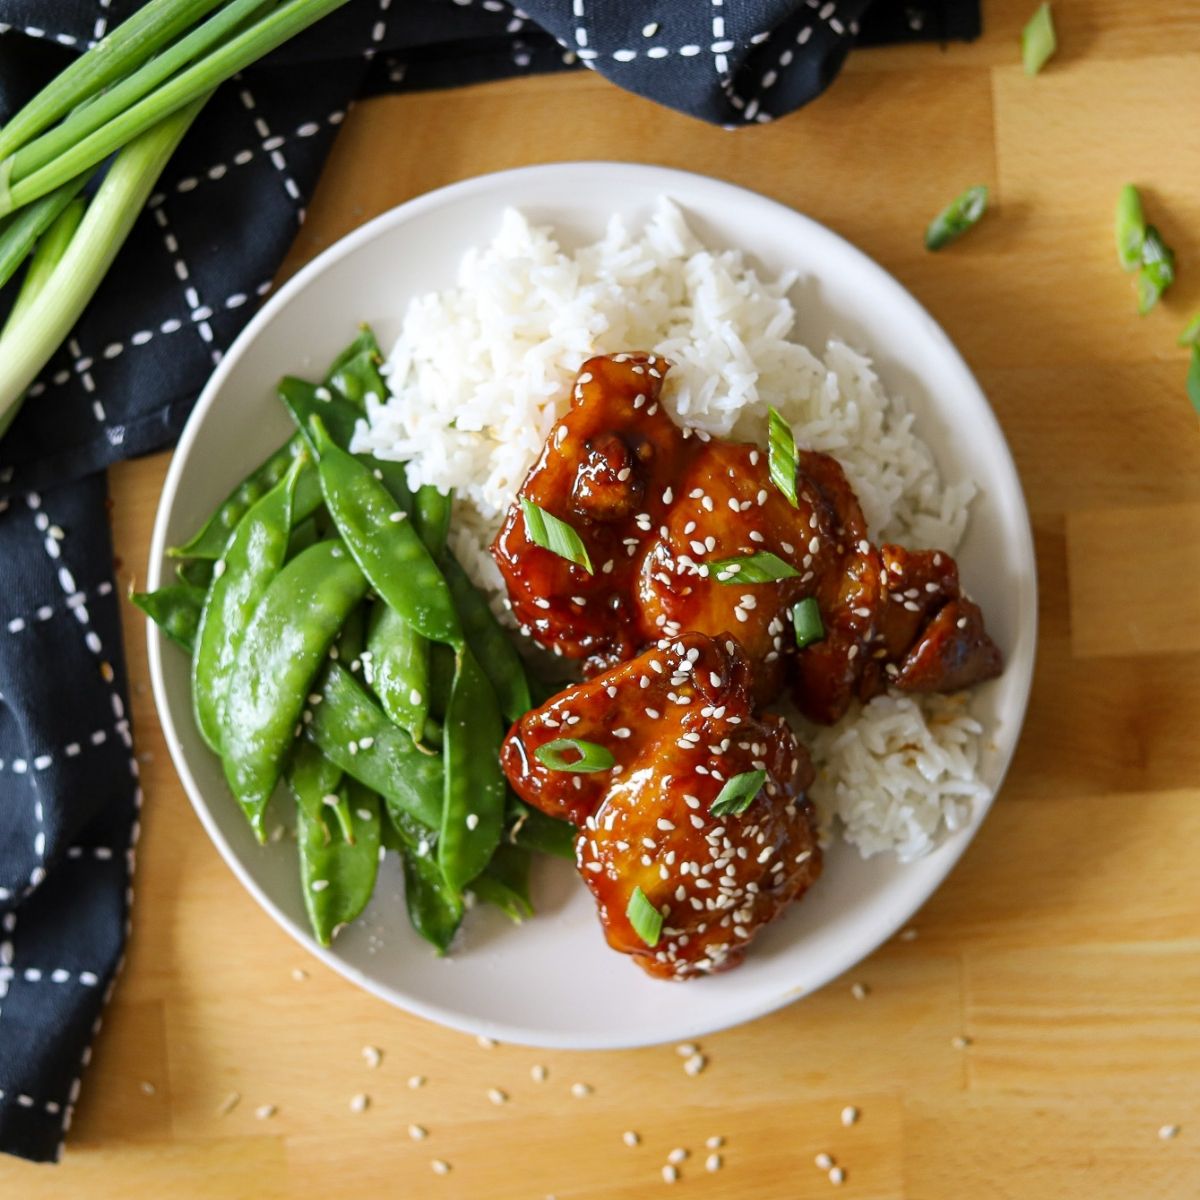 A plate full of white rice, snow peas, and Asian glazed chicken thighs